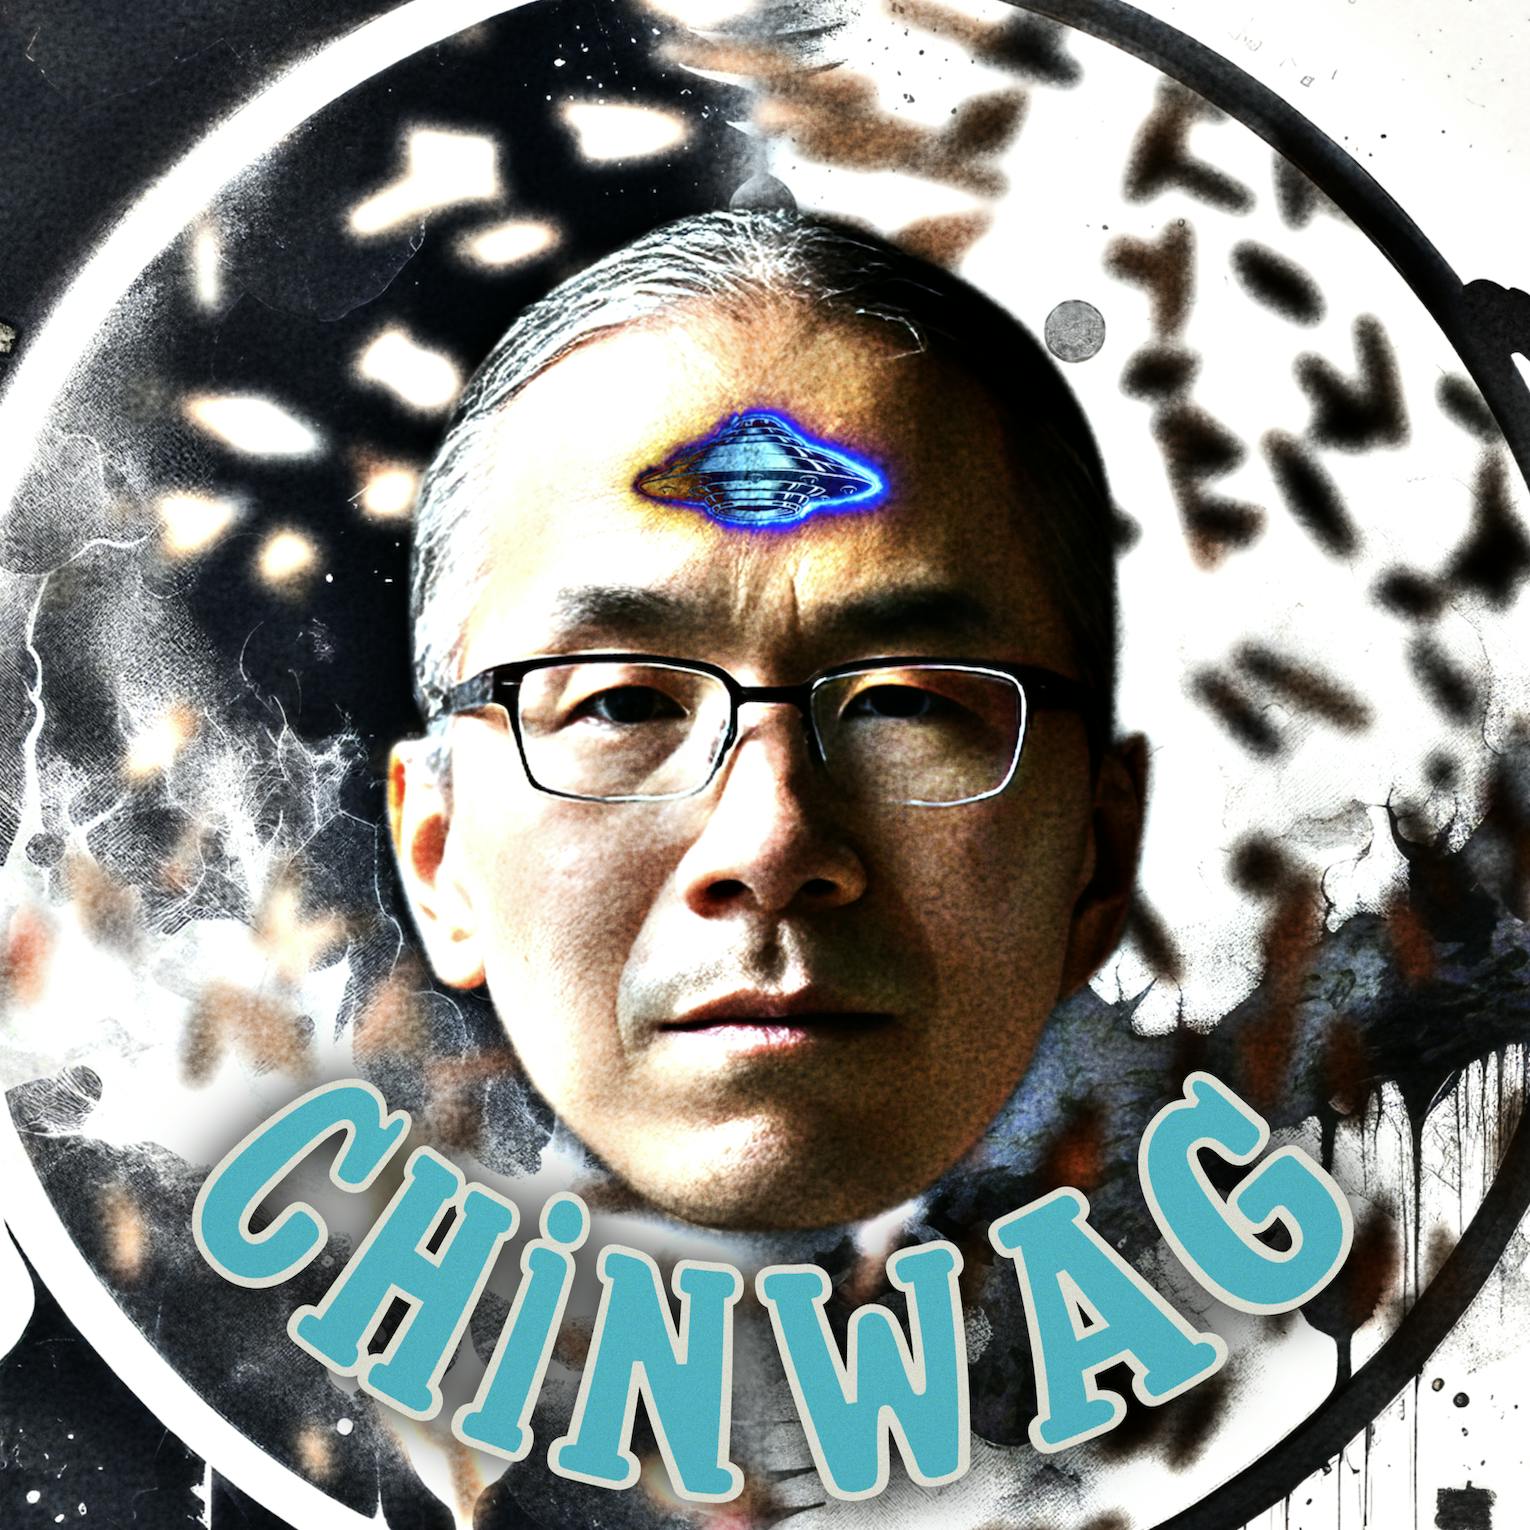 A Different Kind of Ted (Chiang) Talk